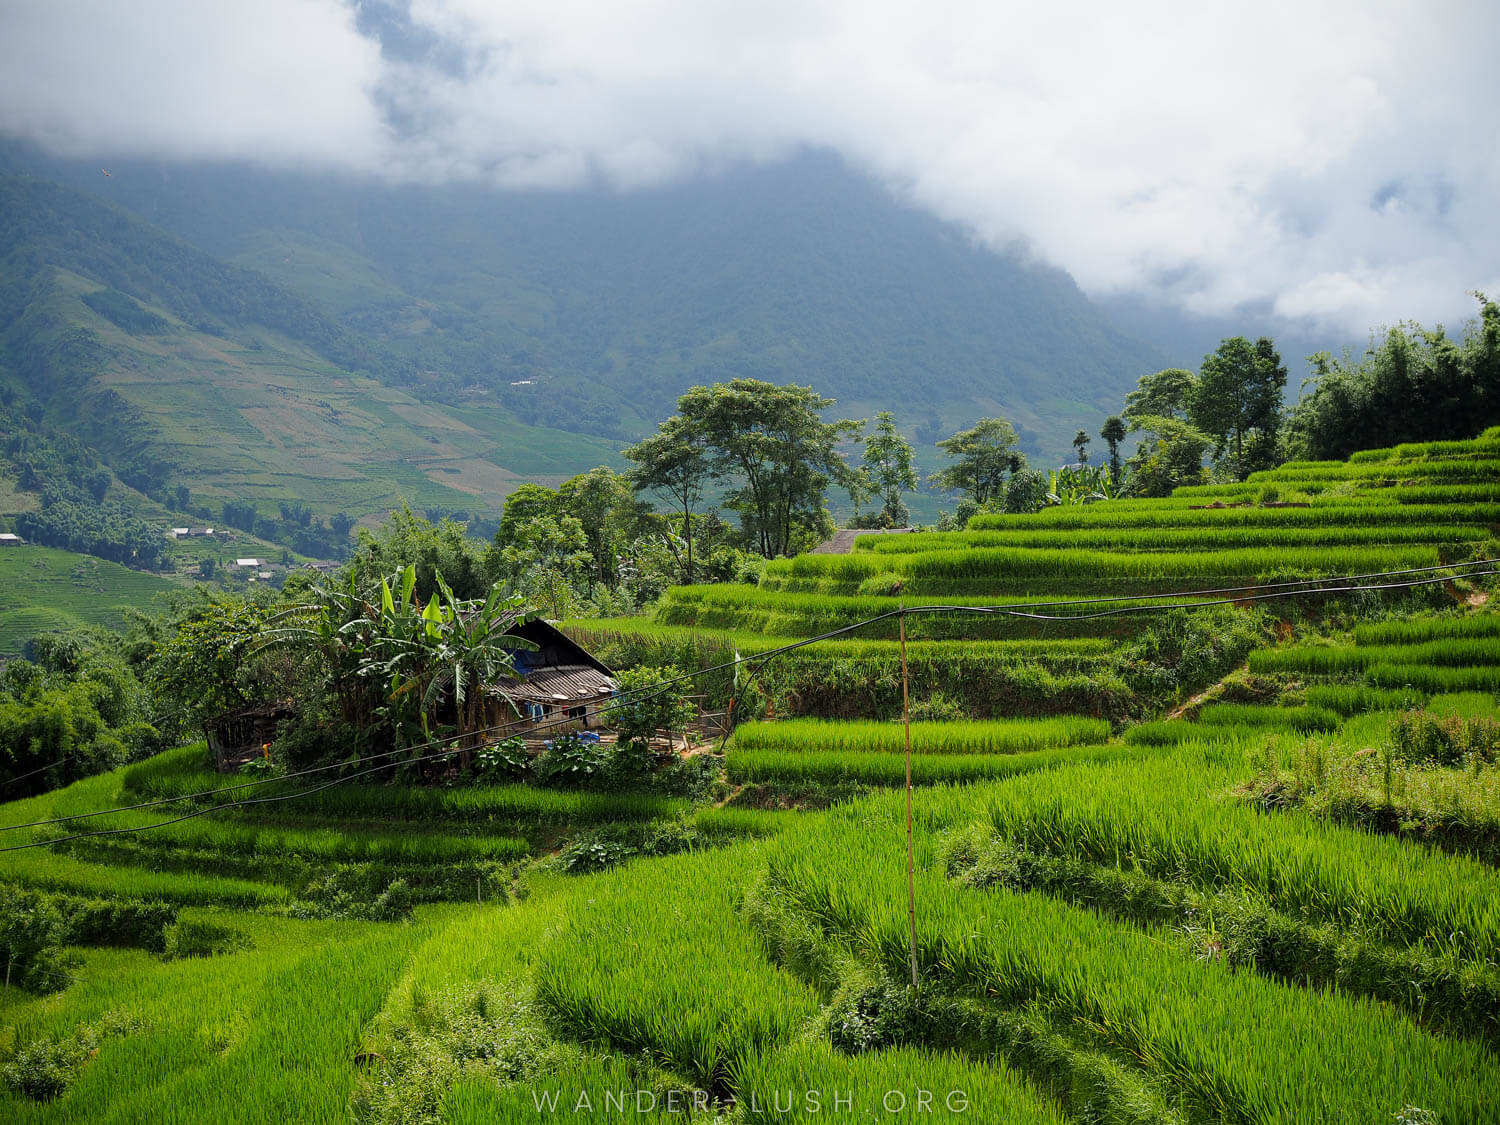 Looking to experience an authentic Hmong homestay in Sapa, Vietnam? Indigo Snail Boutique Hmong Homestay in Ta Van village is a wonderful getaway from Sapa town. Featuring boutique accommodation, trekking, textiles, and home-cooked meals.